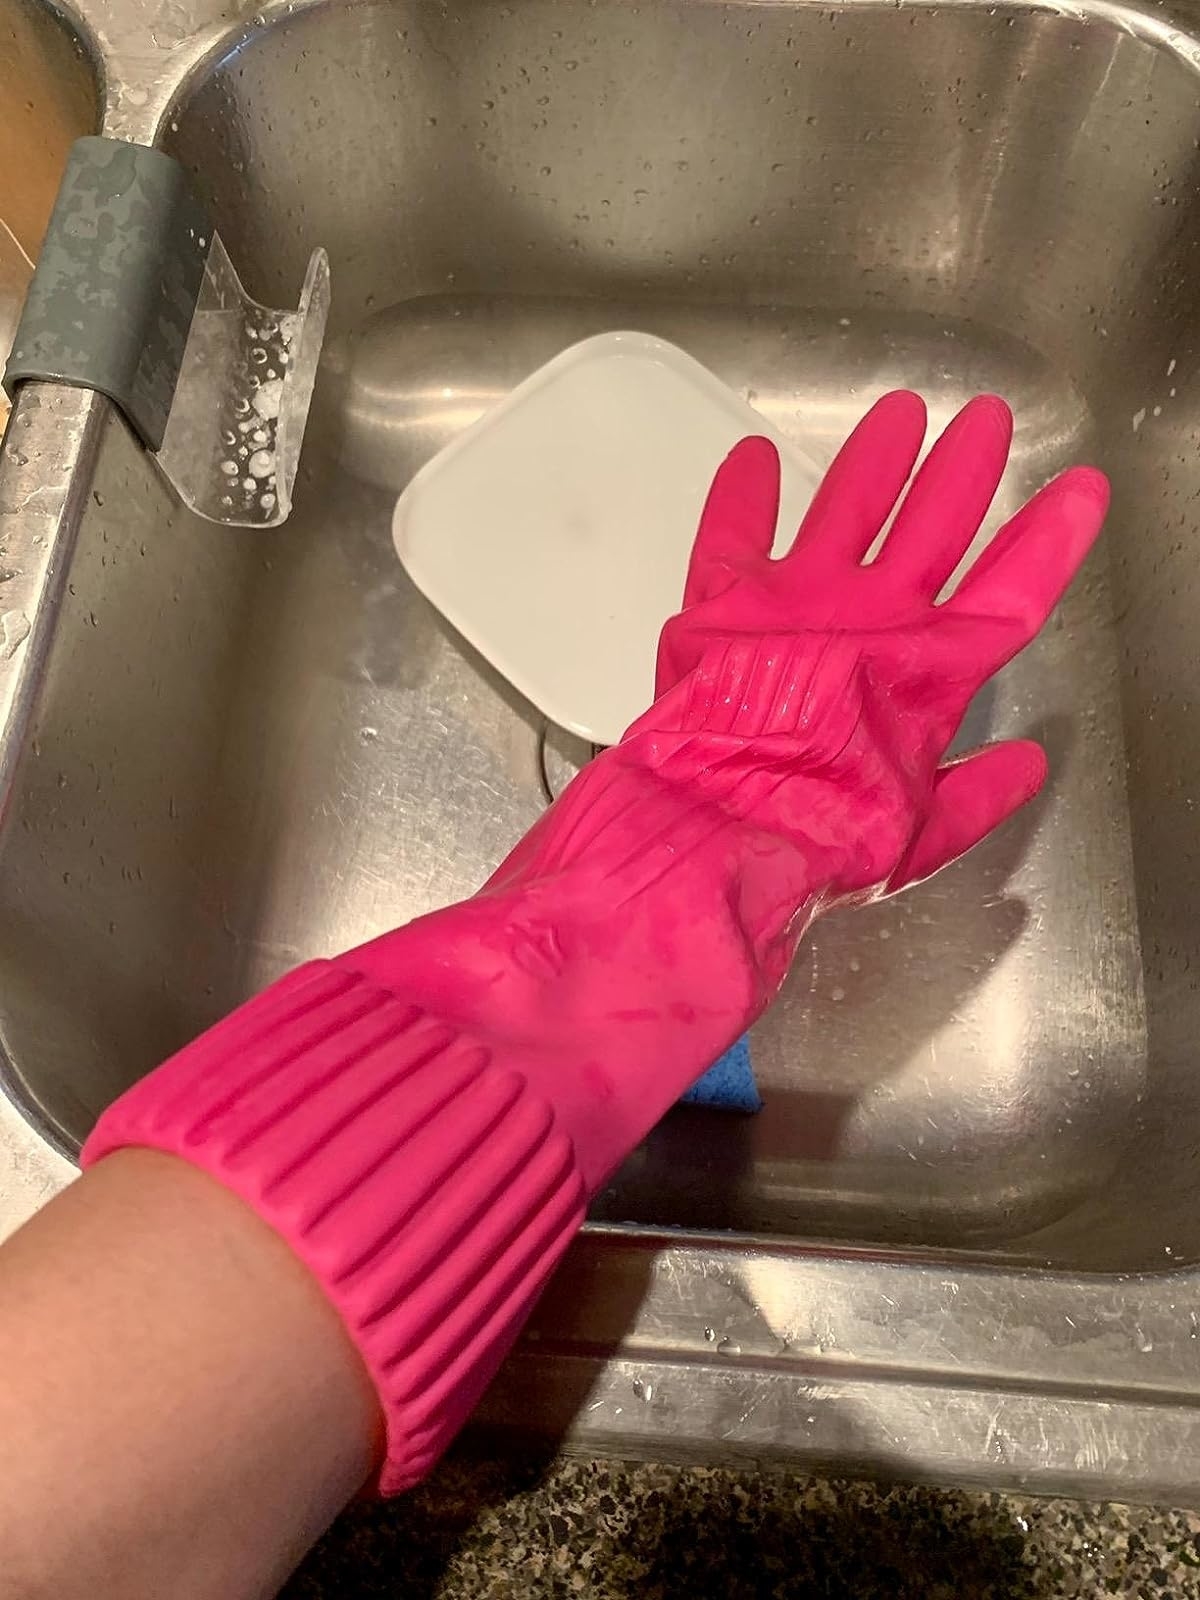 Reviewer wearing the pink cleaning glove near their sink